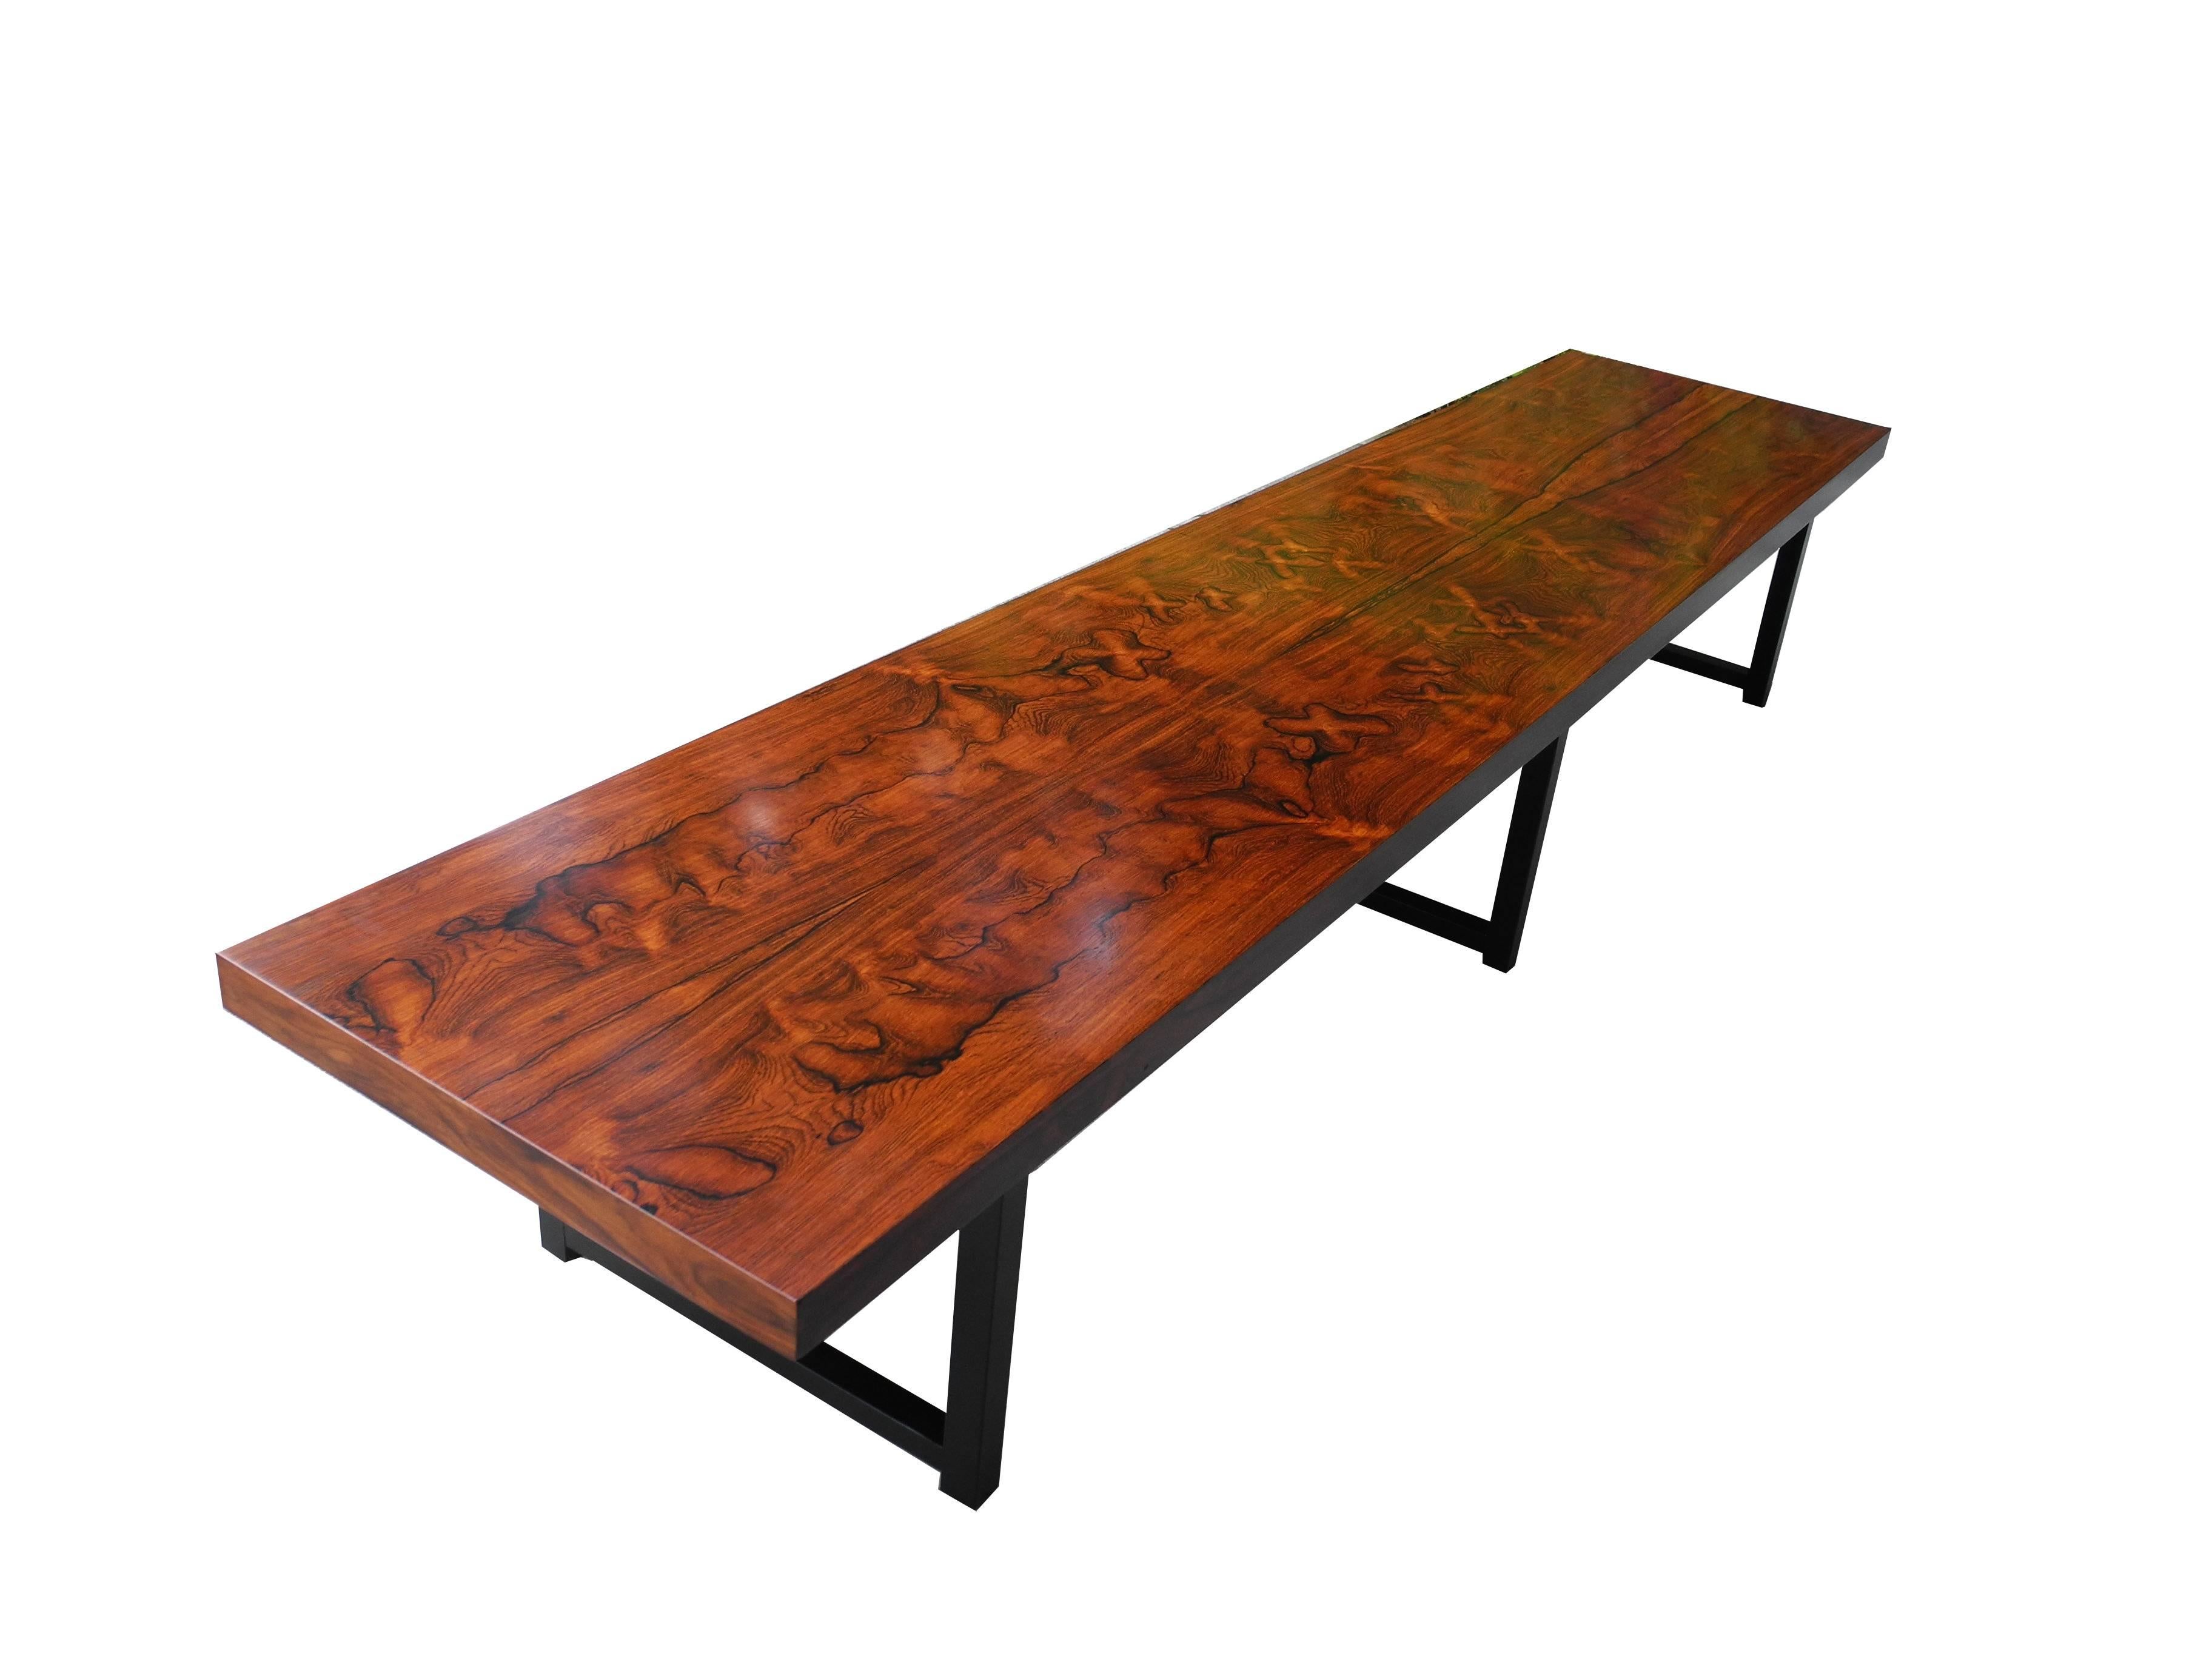 American Mid-Century Modern Long Rosewood Bench with Fantastic Grain by Milo Baughman